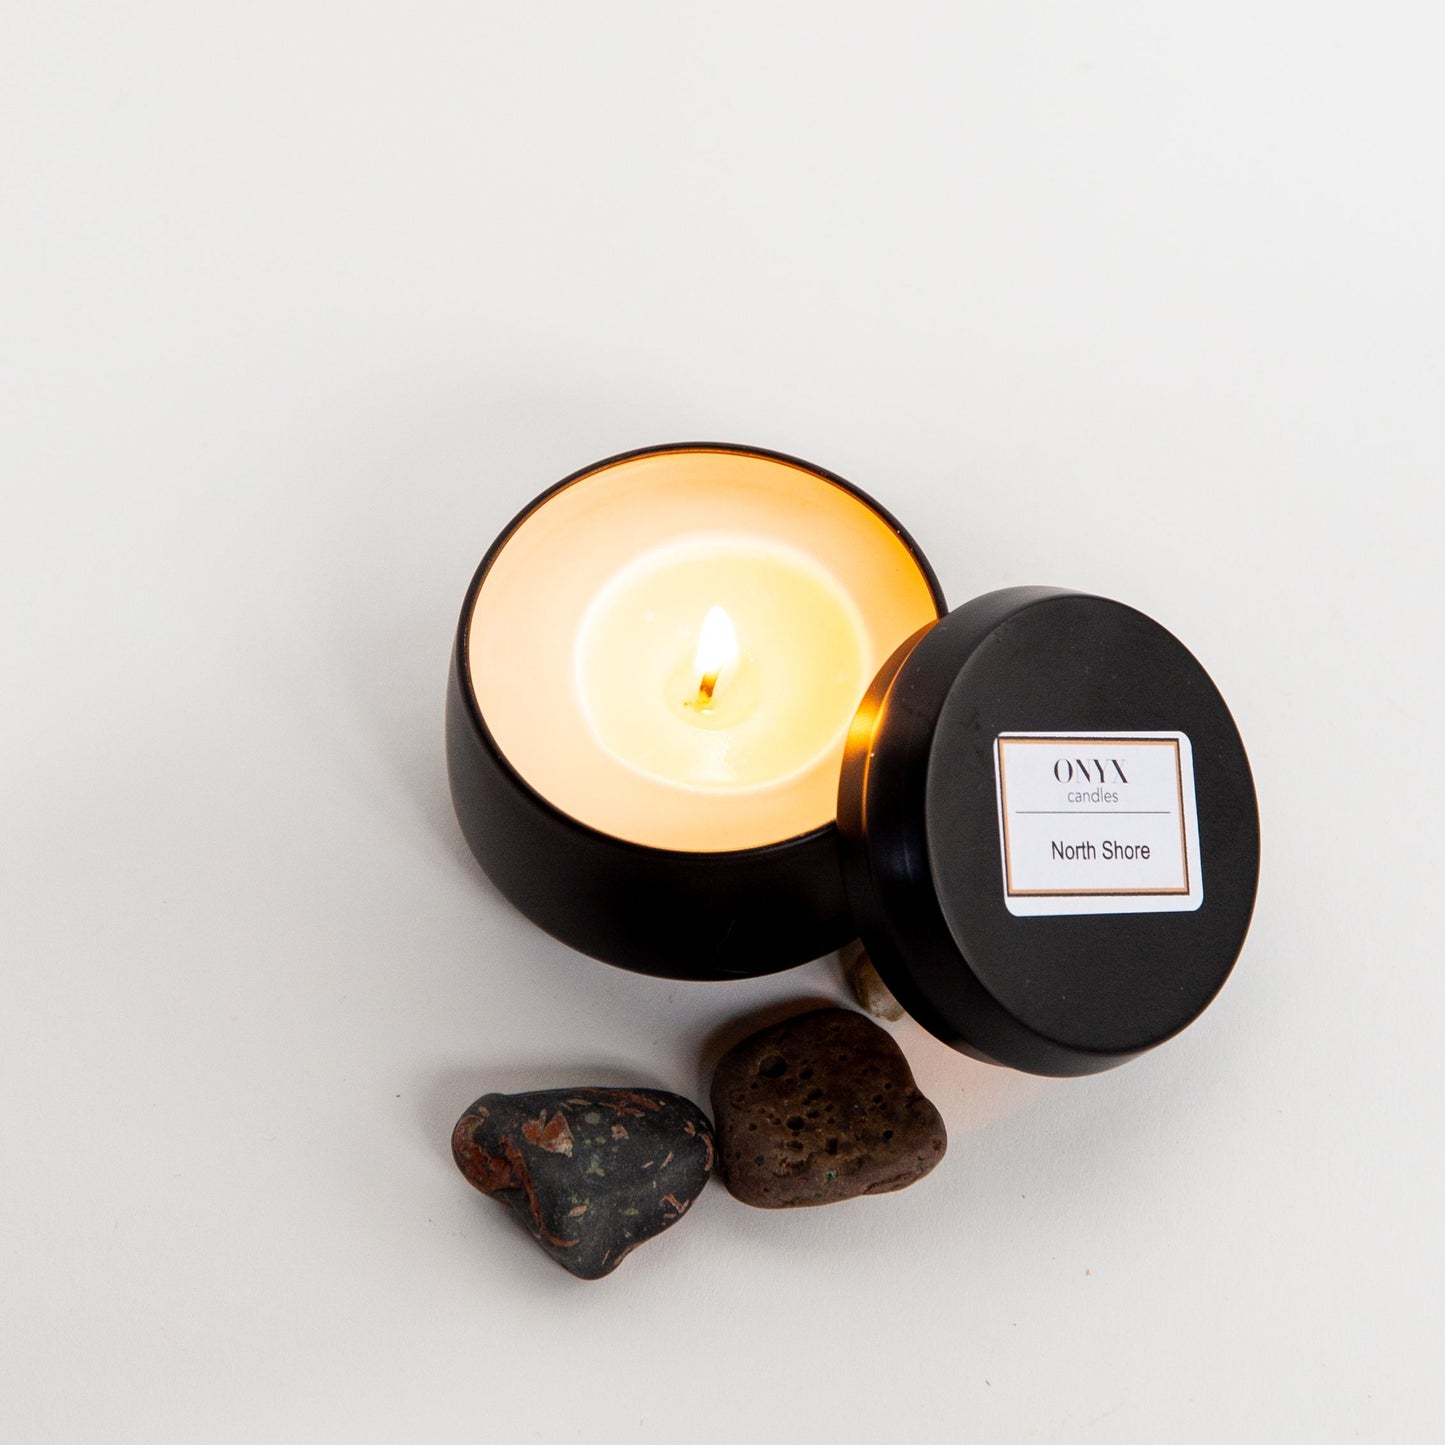 North Shore candle burning brightly in the 4oz matte black tin option. The candle is lit and surrounded by stones from Lake Superior